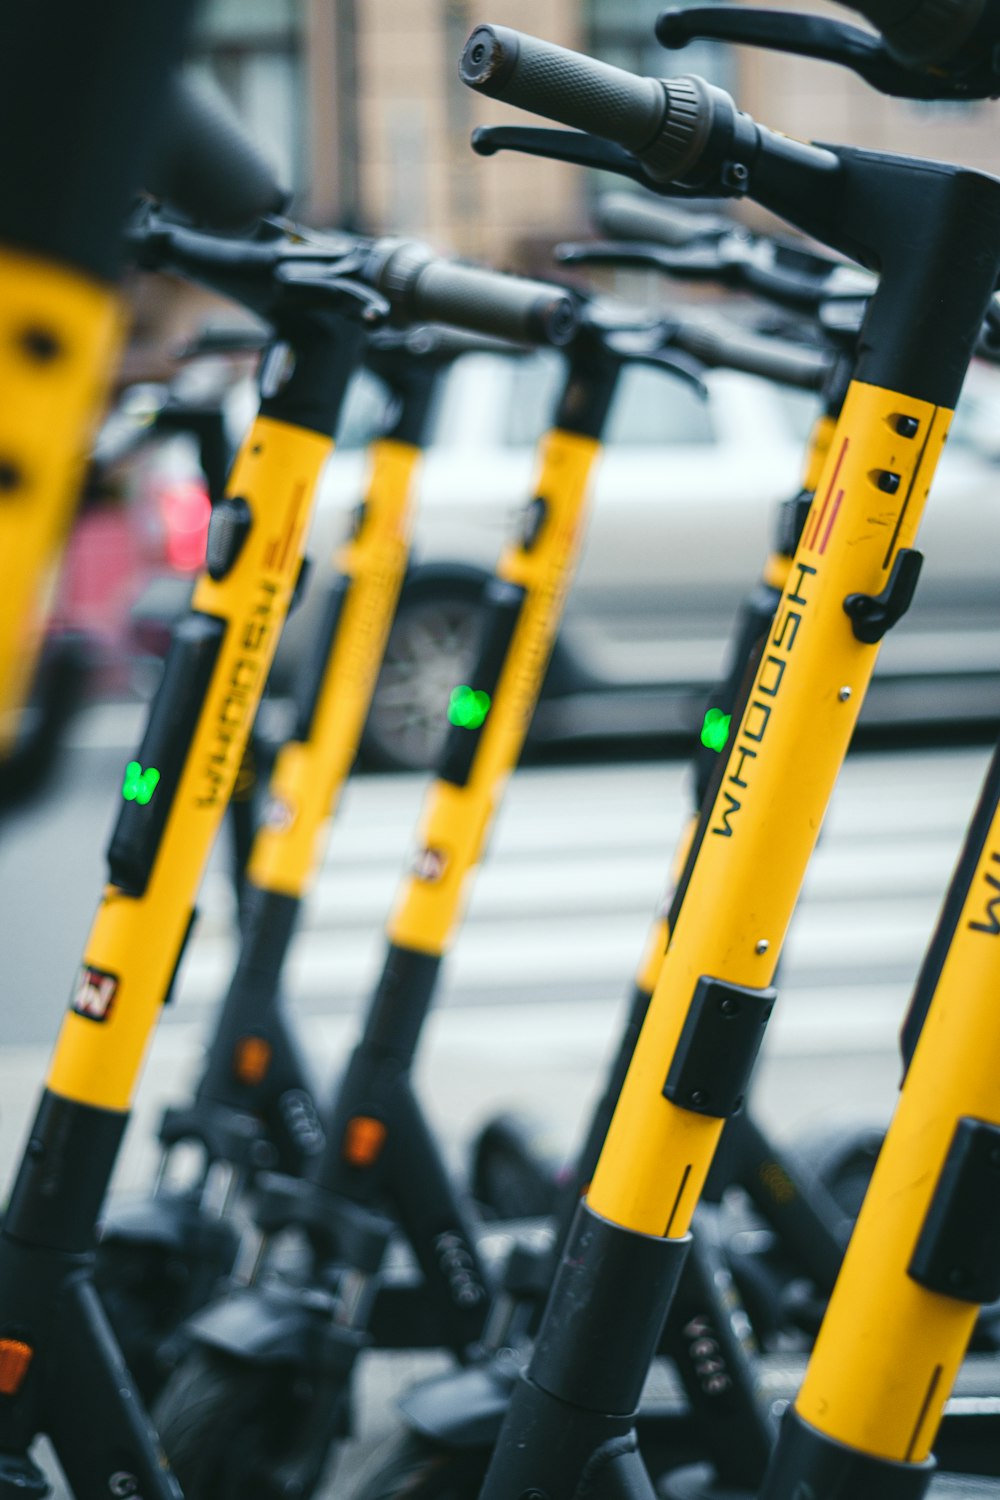 a row of yellow and black scooters parked next to each other